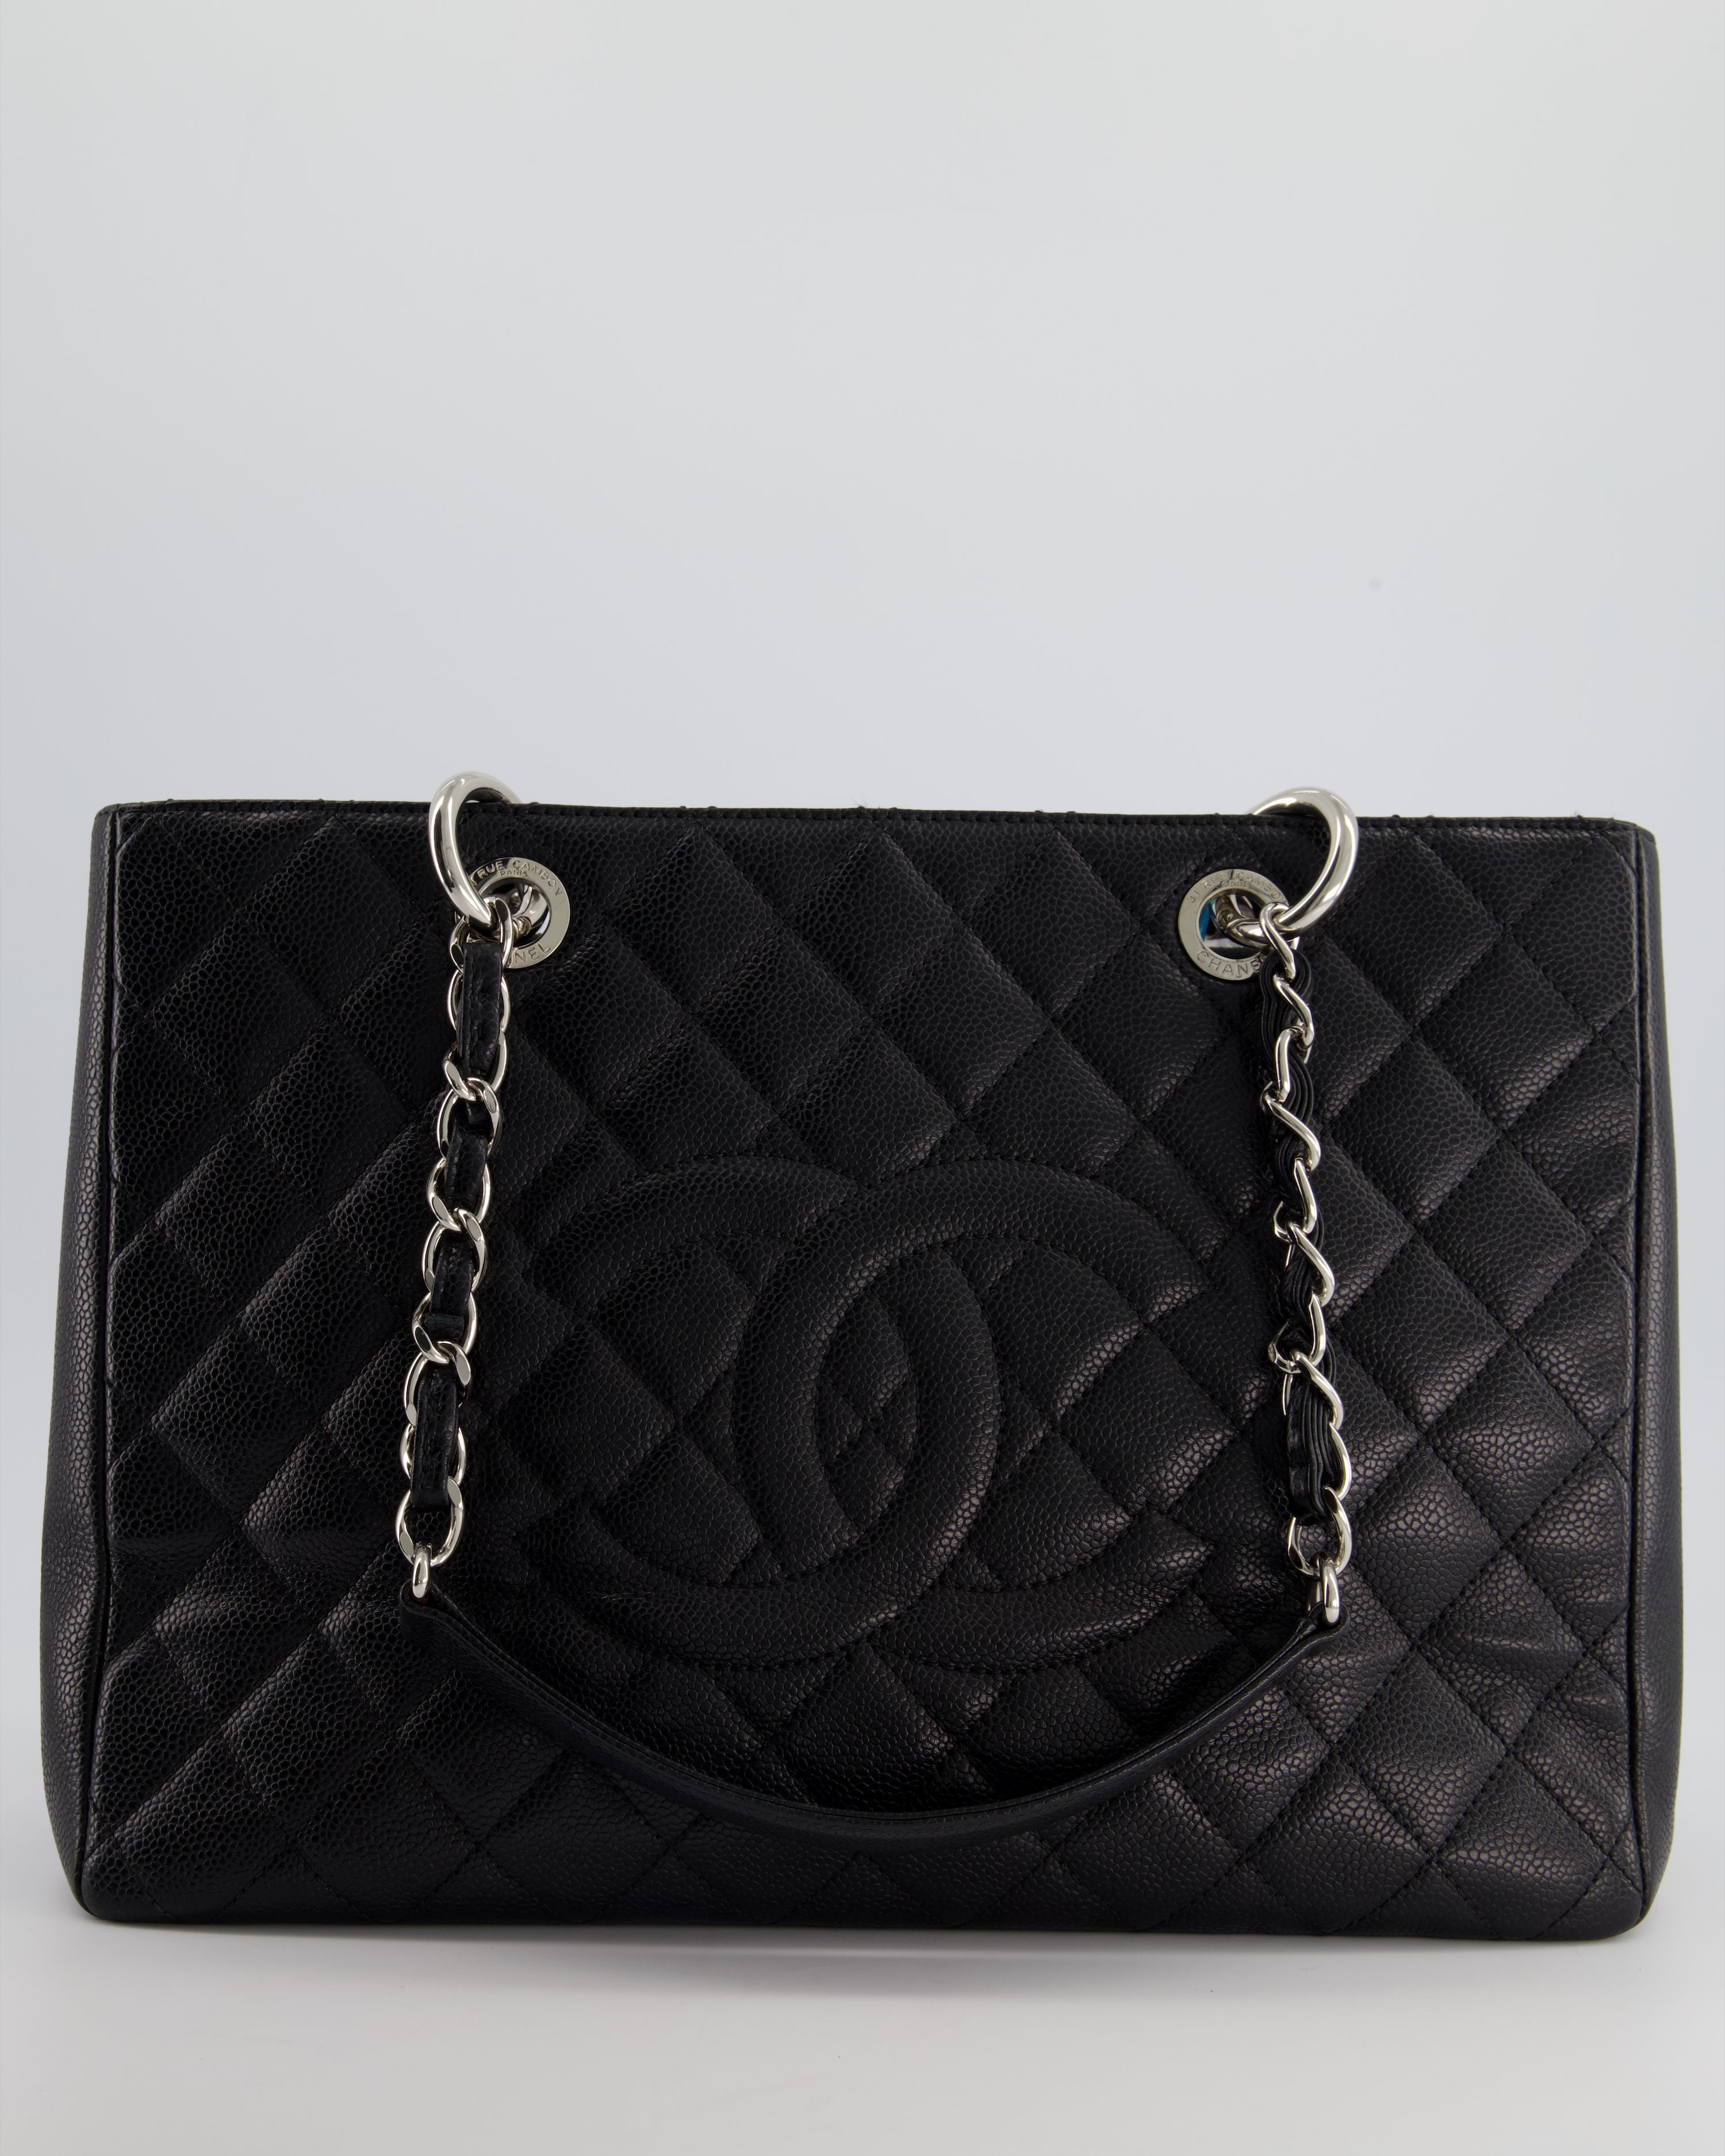 *AMAZING SHAPE* Chanel Black GST Grand Shopper Tote Bag in Caviar Leather with Silver Hardware